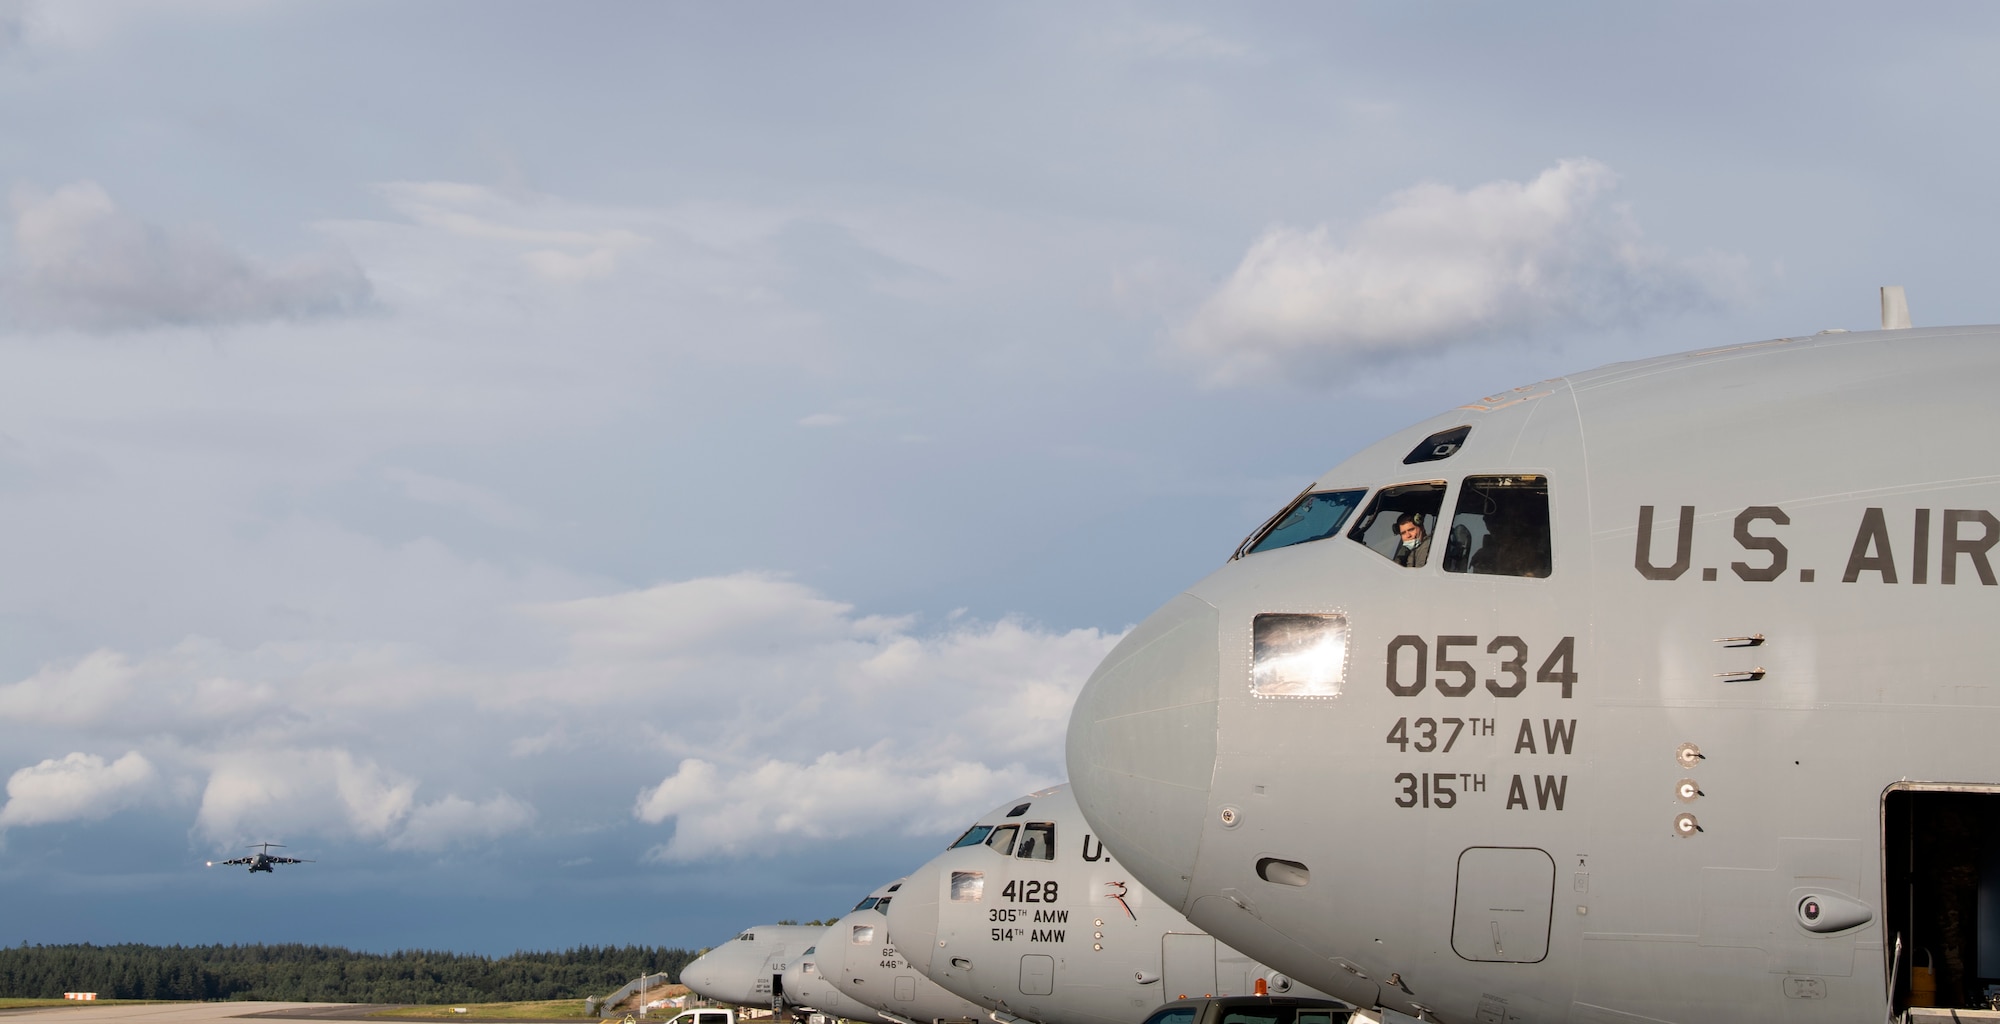 A U.S. Air Force C-17 Globemaster III assigned to Joint Base Charleston, South Carolina, prepares to land on the flightline of Spangdahlem Air Base, Germany, near a row of parked Air Mobility Command cargo aircraft Aug. 27, 2021.